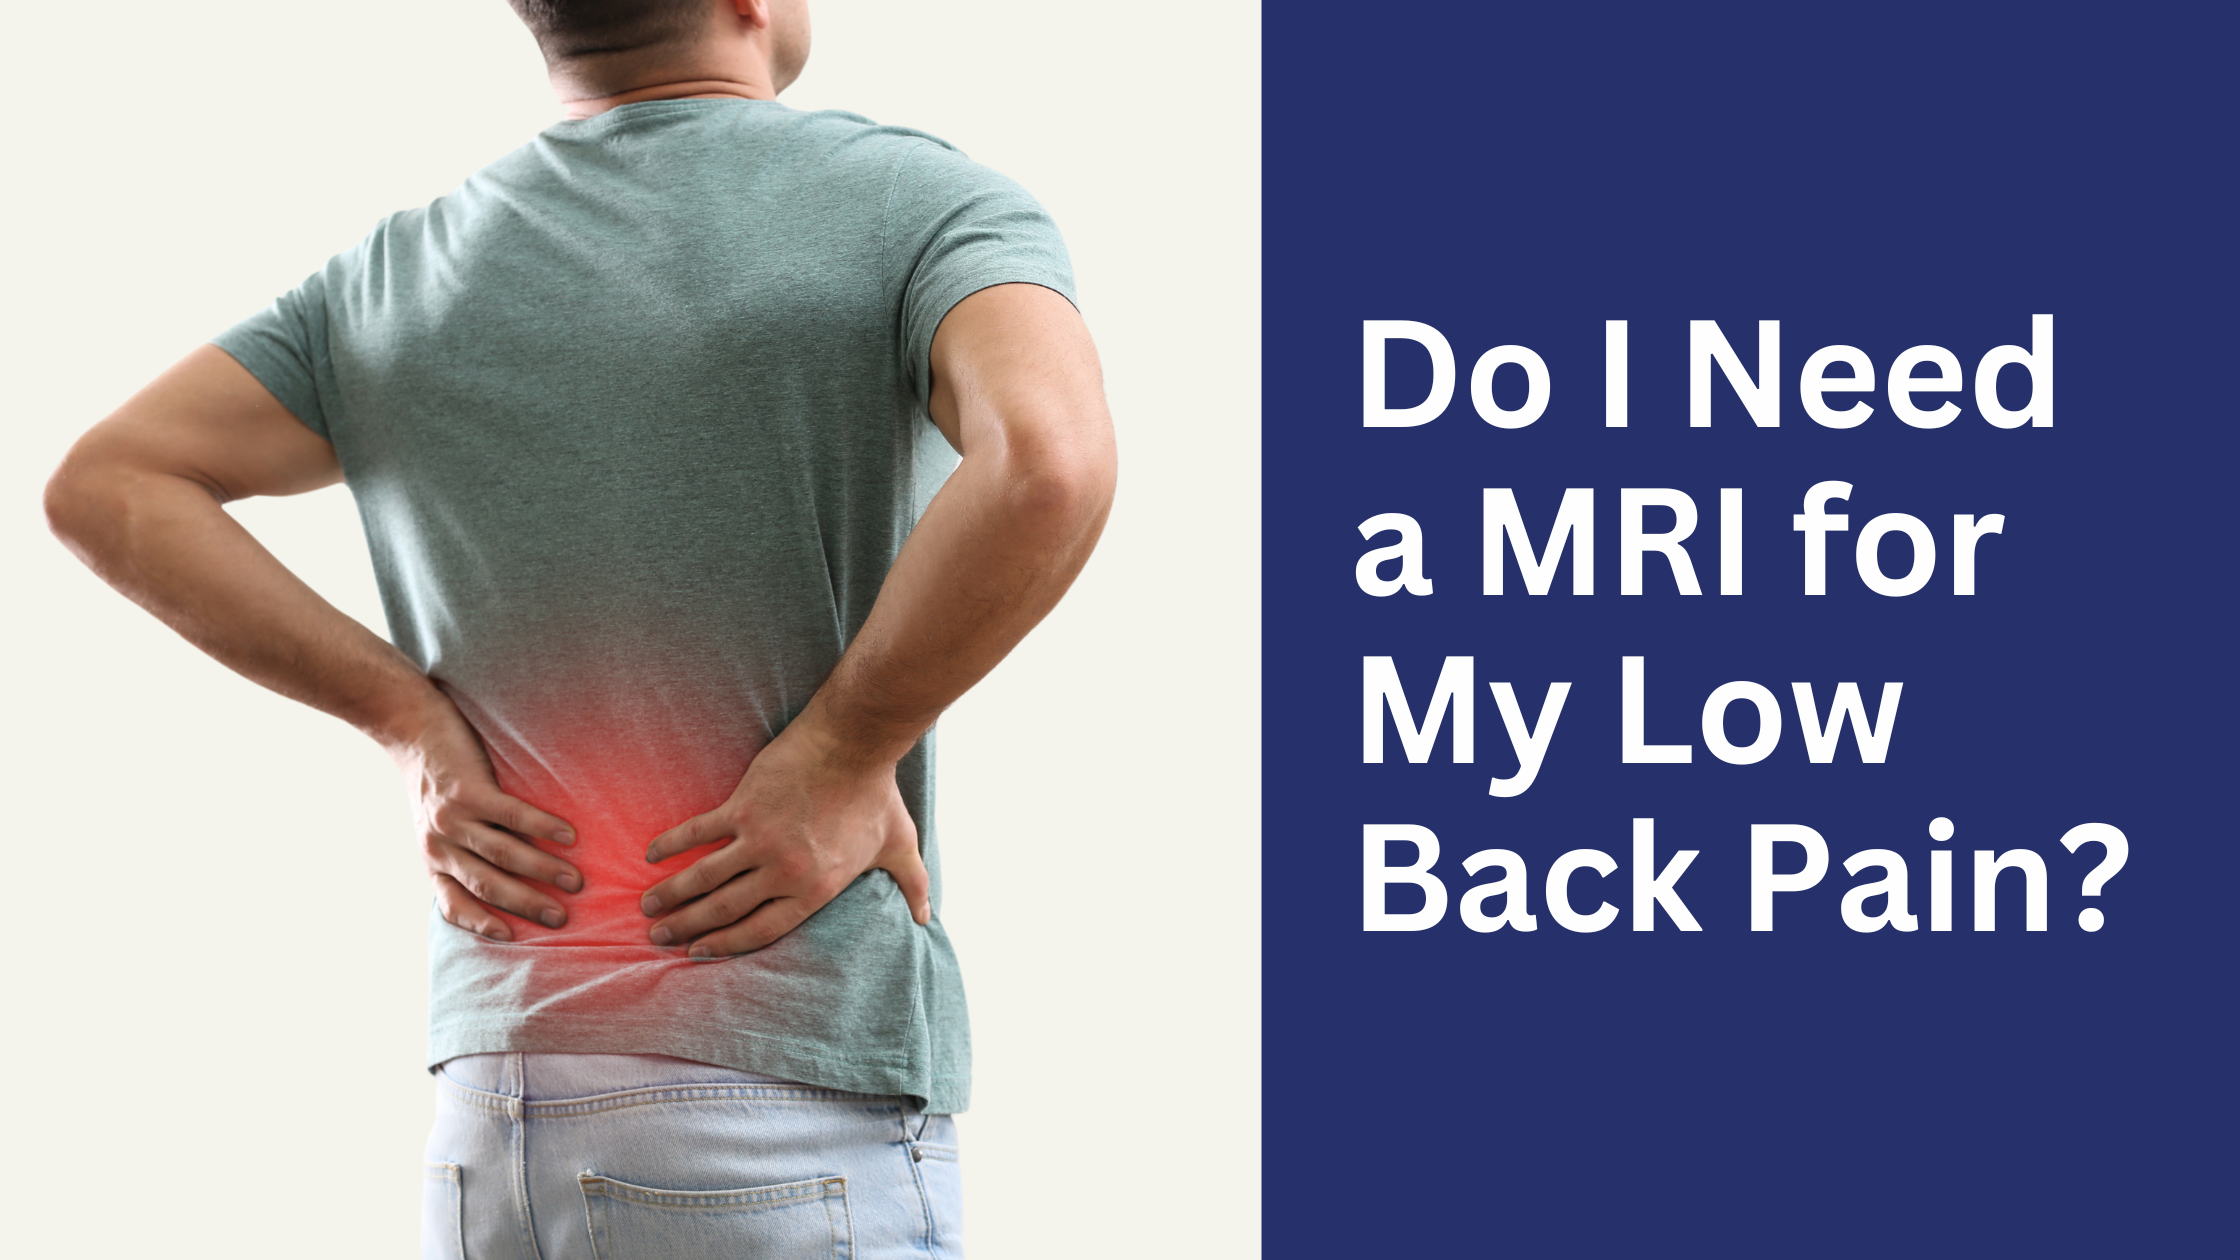 Do I Need a MRI for My Low Back Pain?